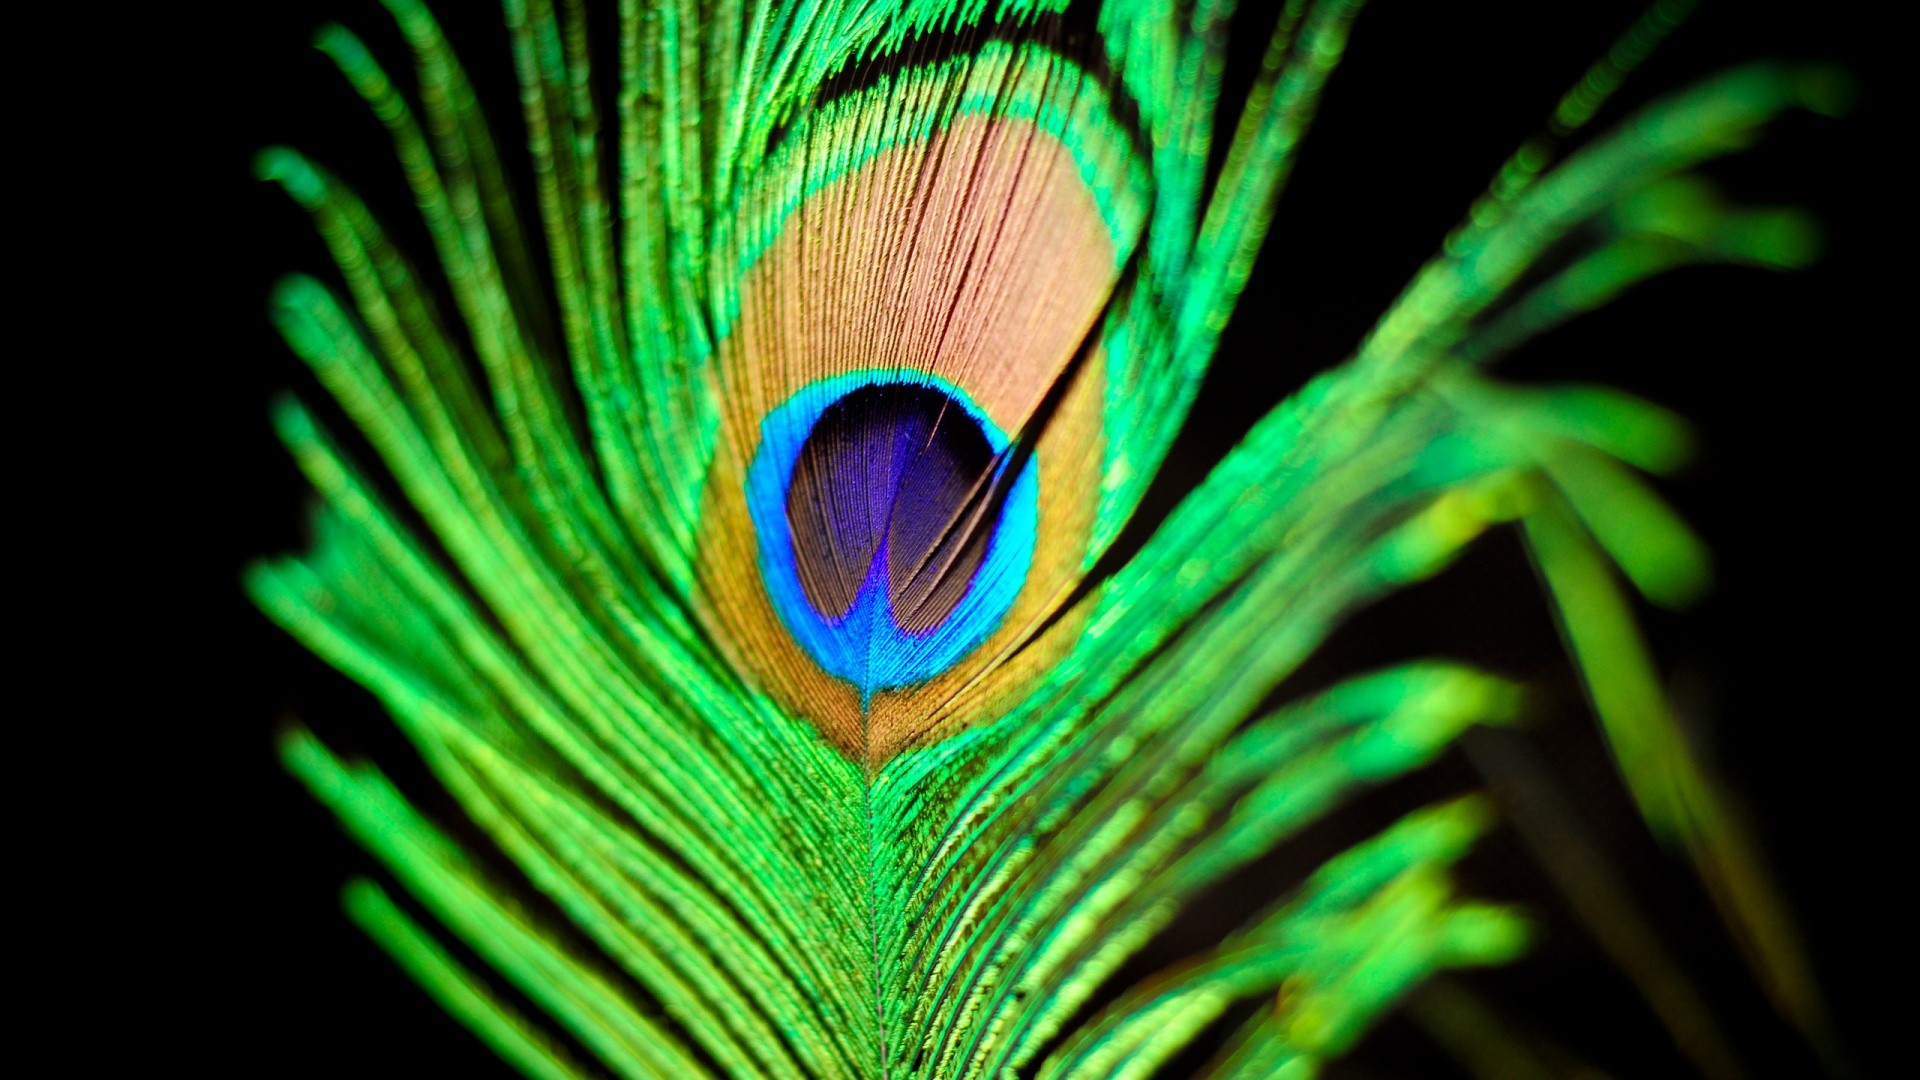 Peacock Feather Wallpaper For